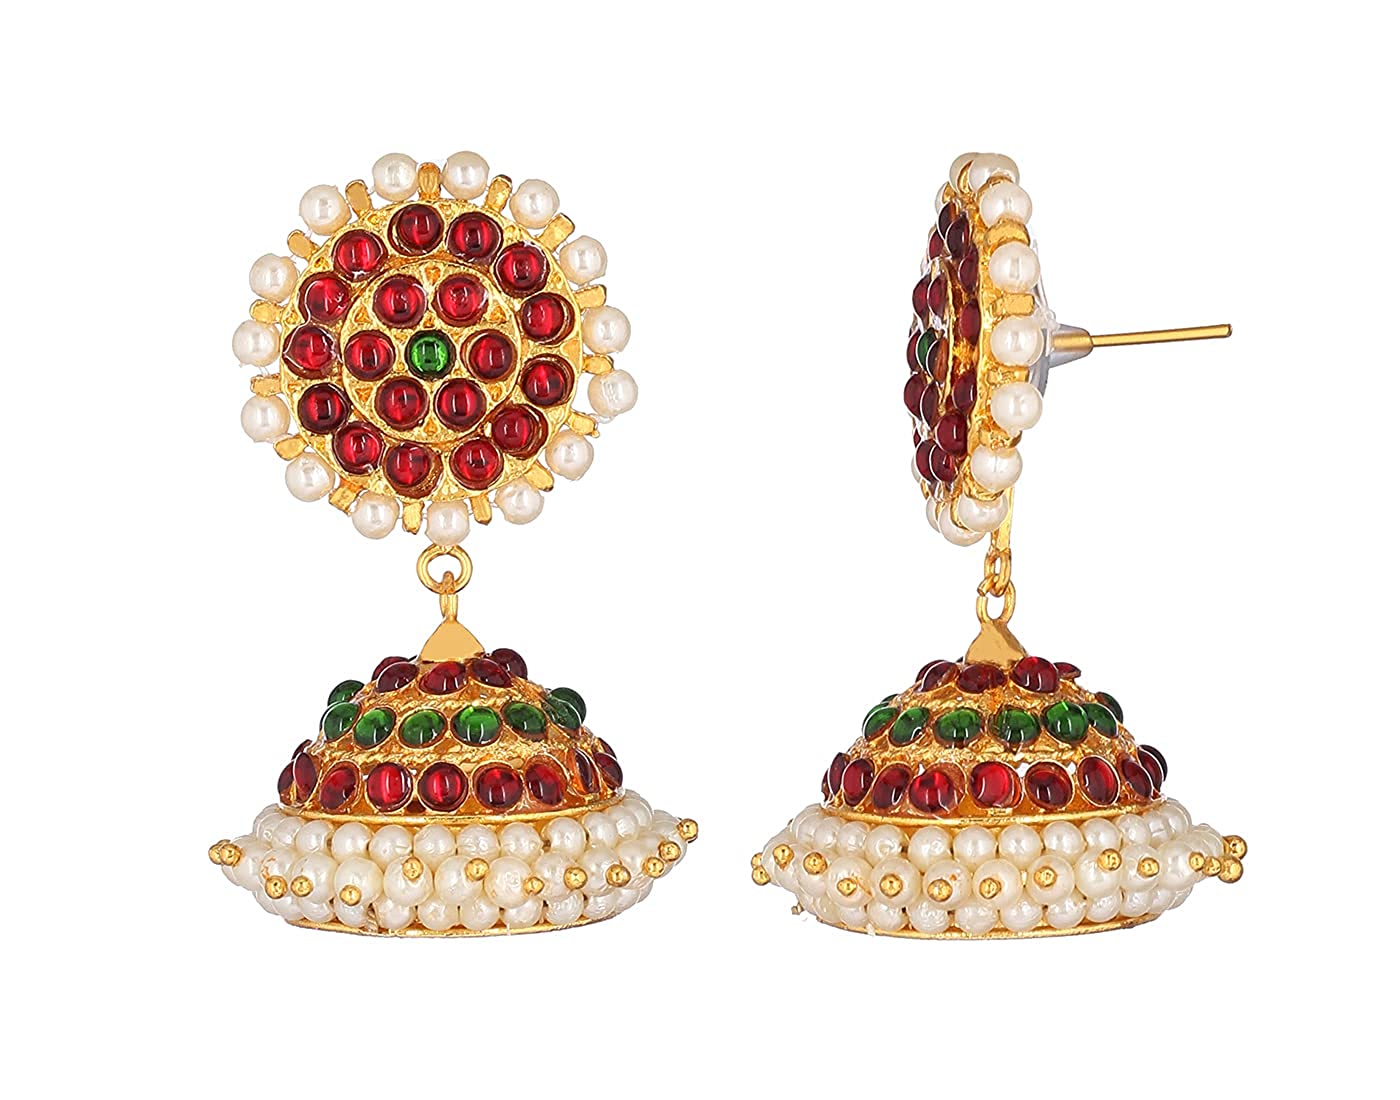 South Indian Dance Earrings in Jhumki Style Golden Collections